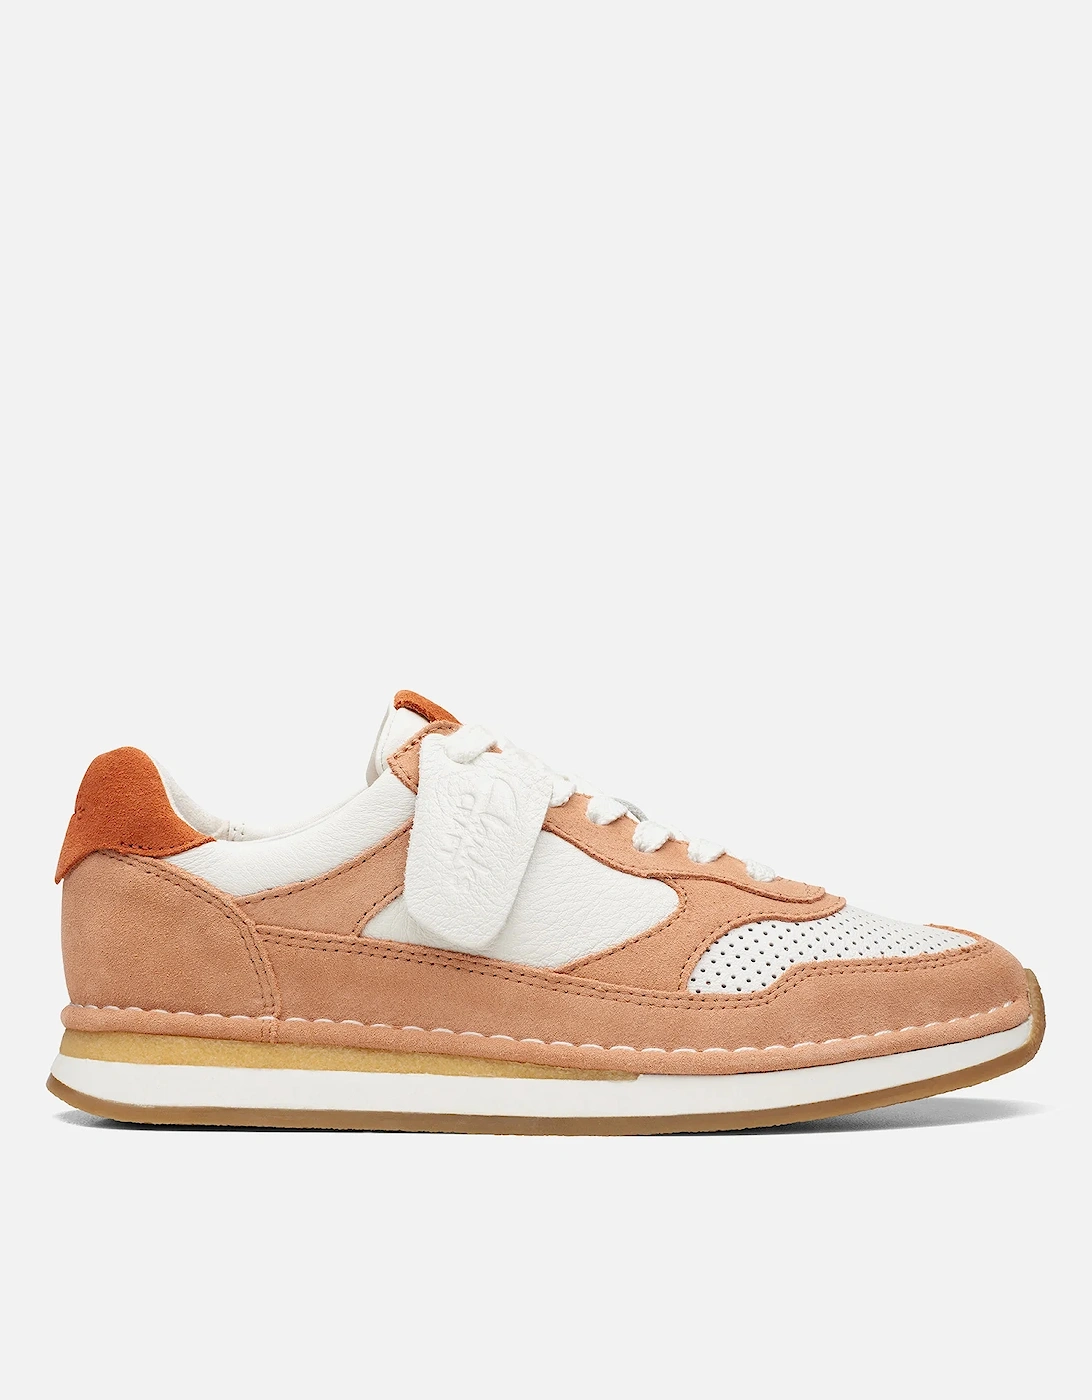 Craft Run Tor Suede and Leather Trainers - - Home - Women's Shoes - Women's Trainers - Women's Low Top Trainers - Craft Run Tor Suede and Leather Trainers, 2 of 1